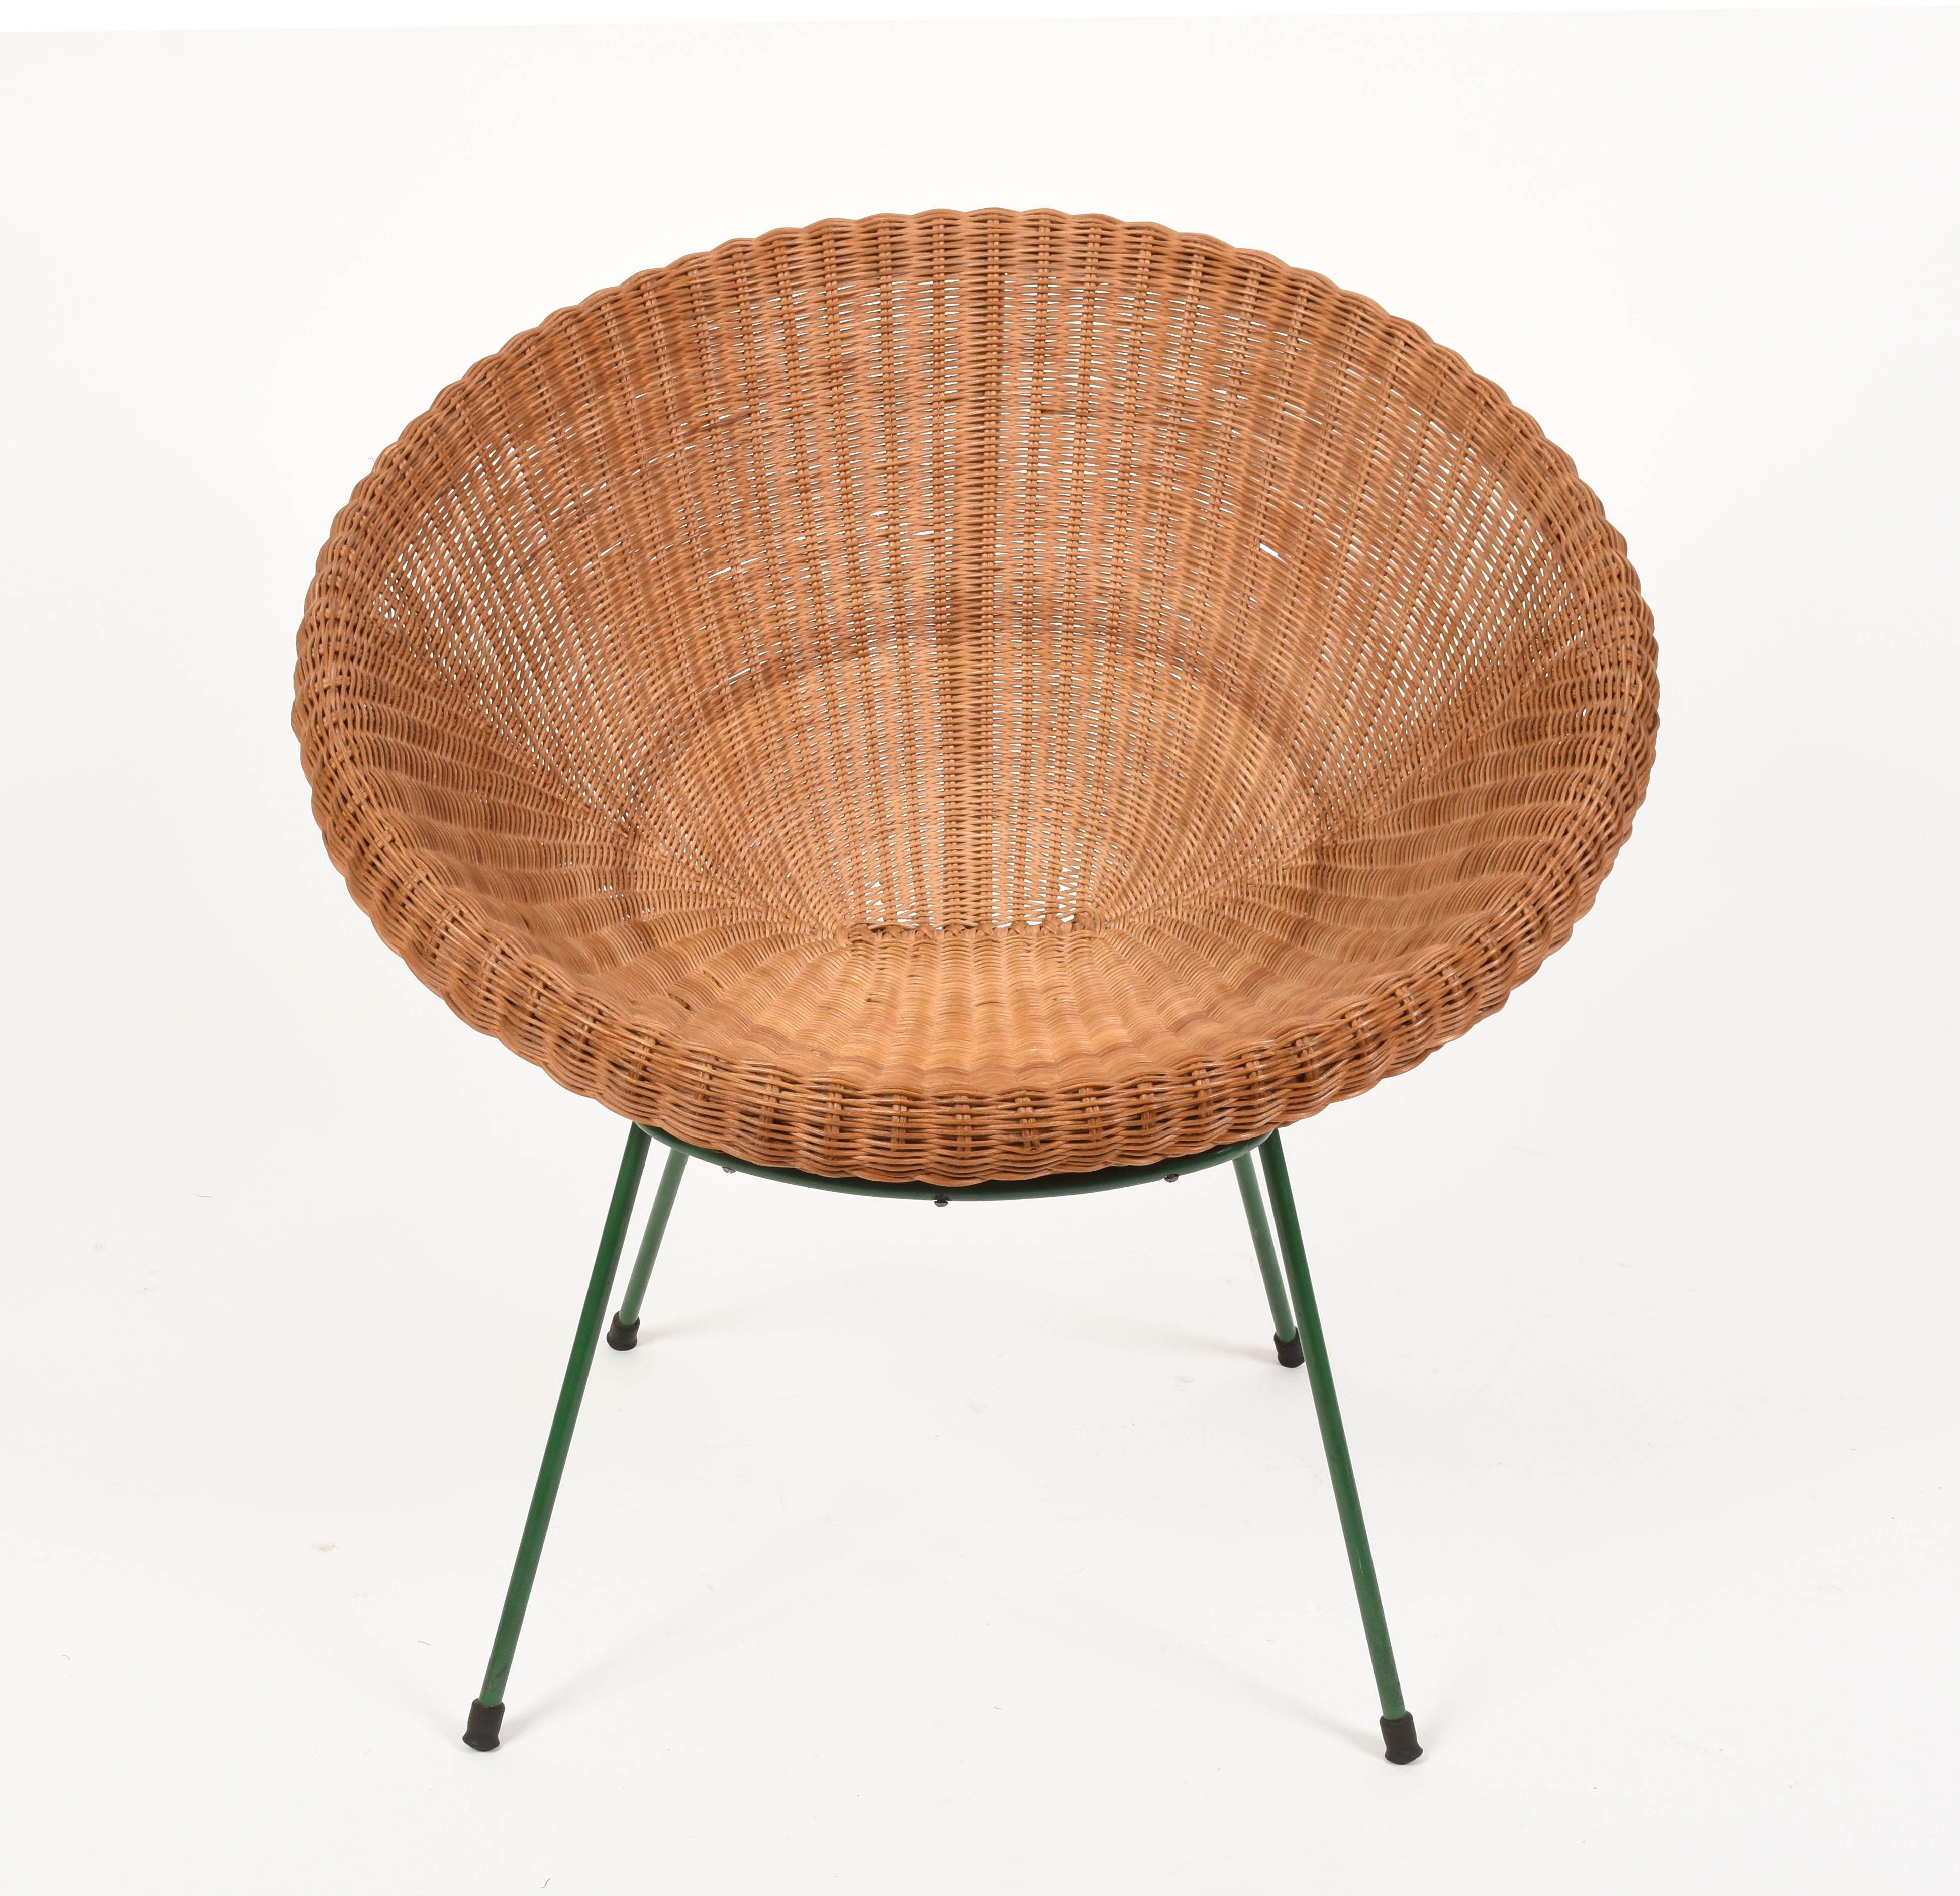 Mid-Century Modern Midcentury Italian Rattan and Bamboo Shell Armchair with Green Metal Legs, 1950s